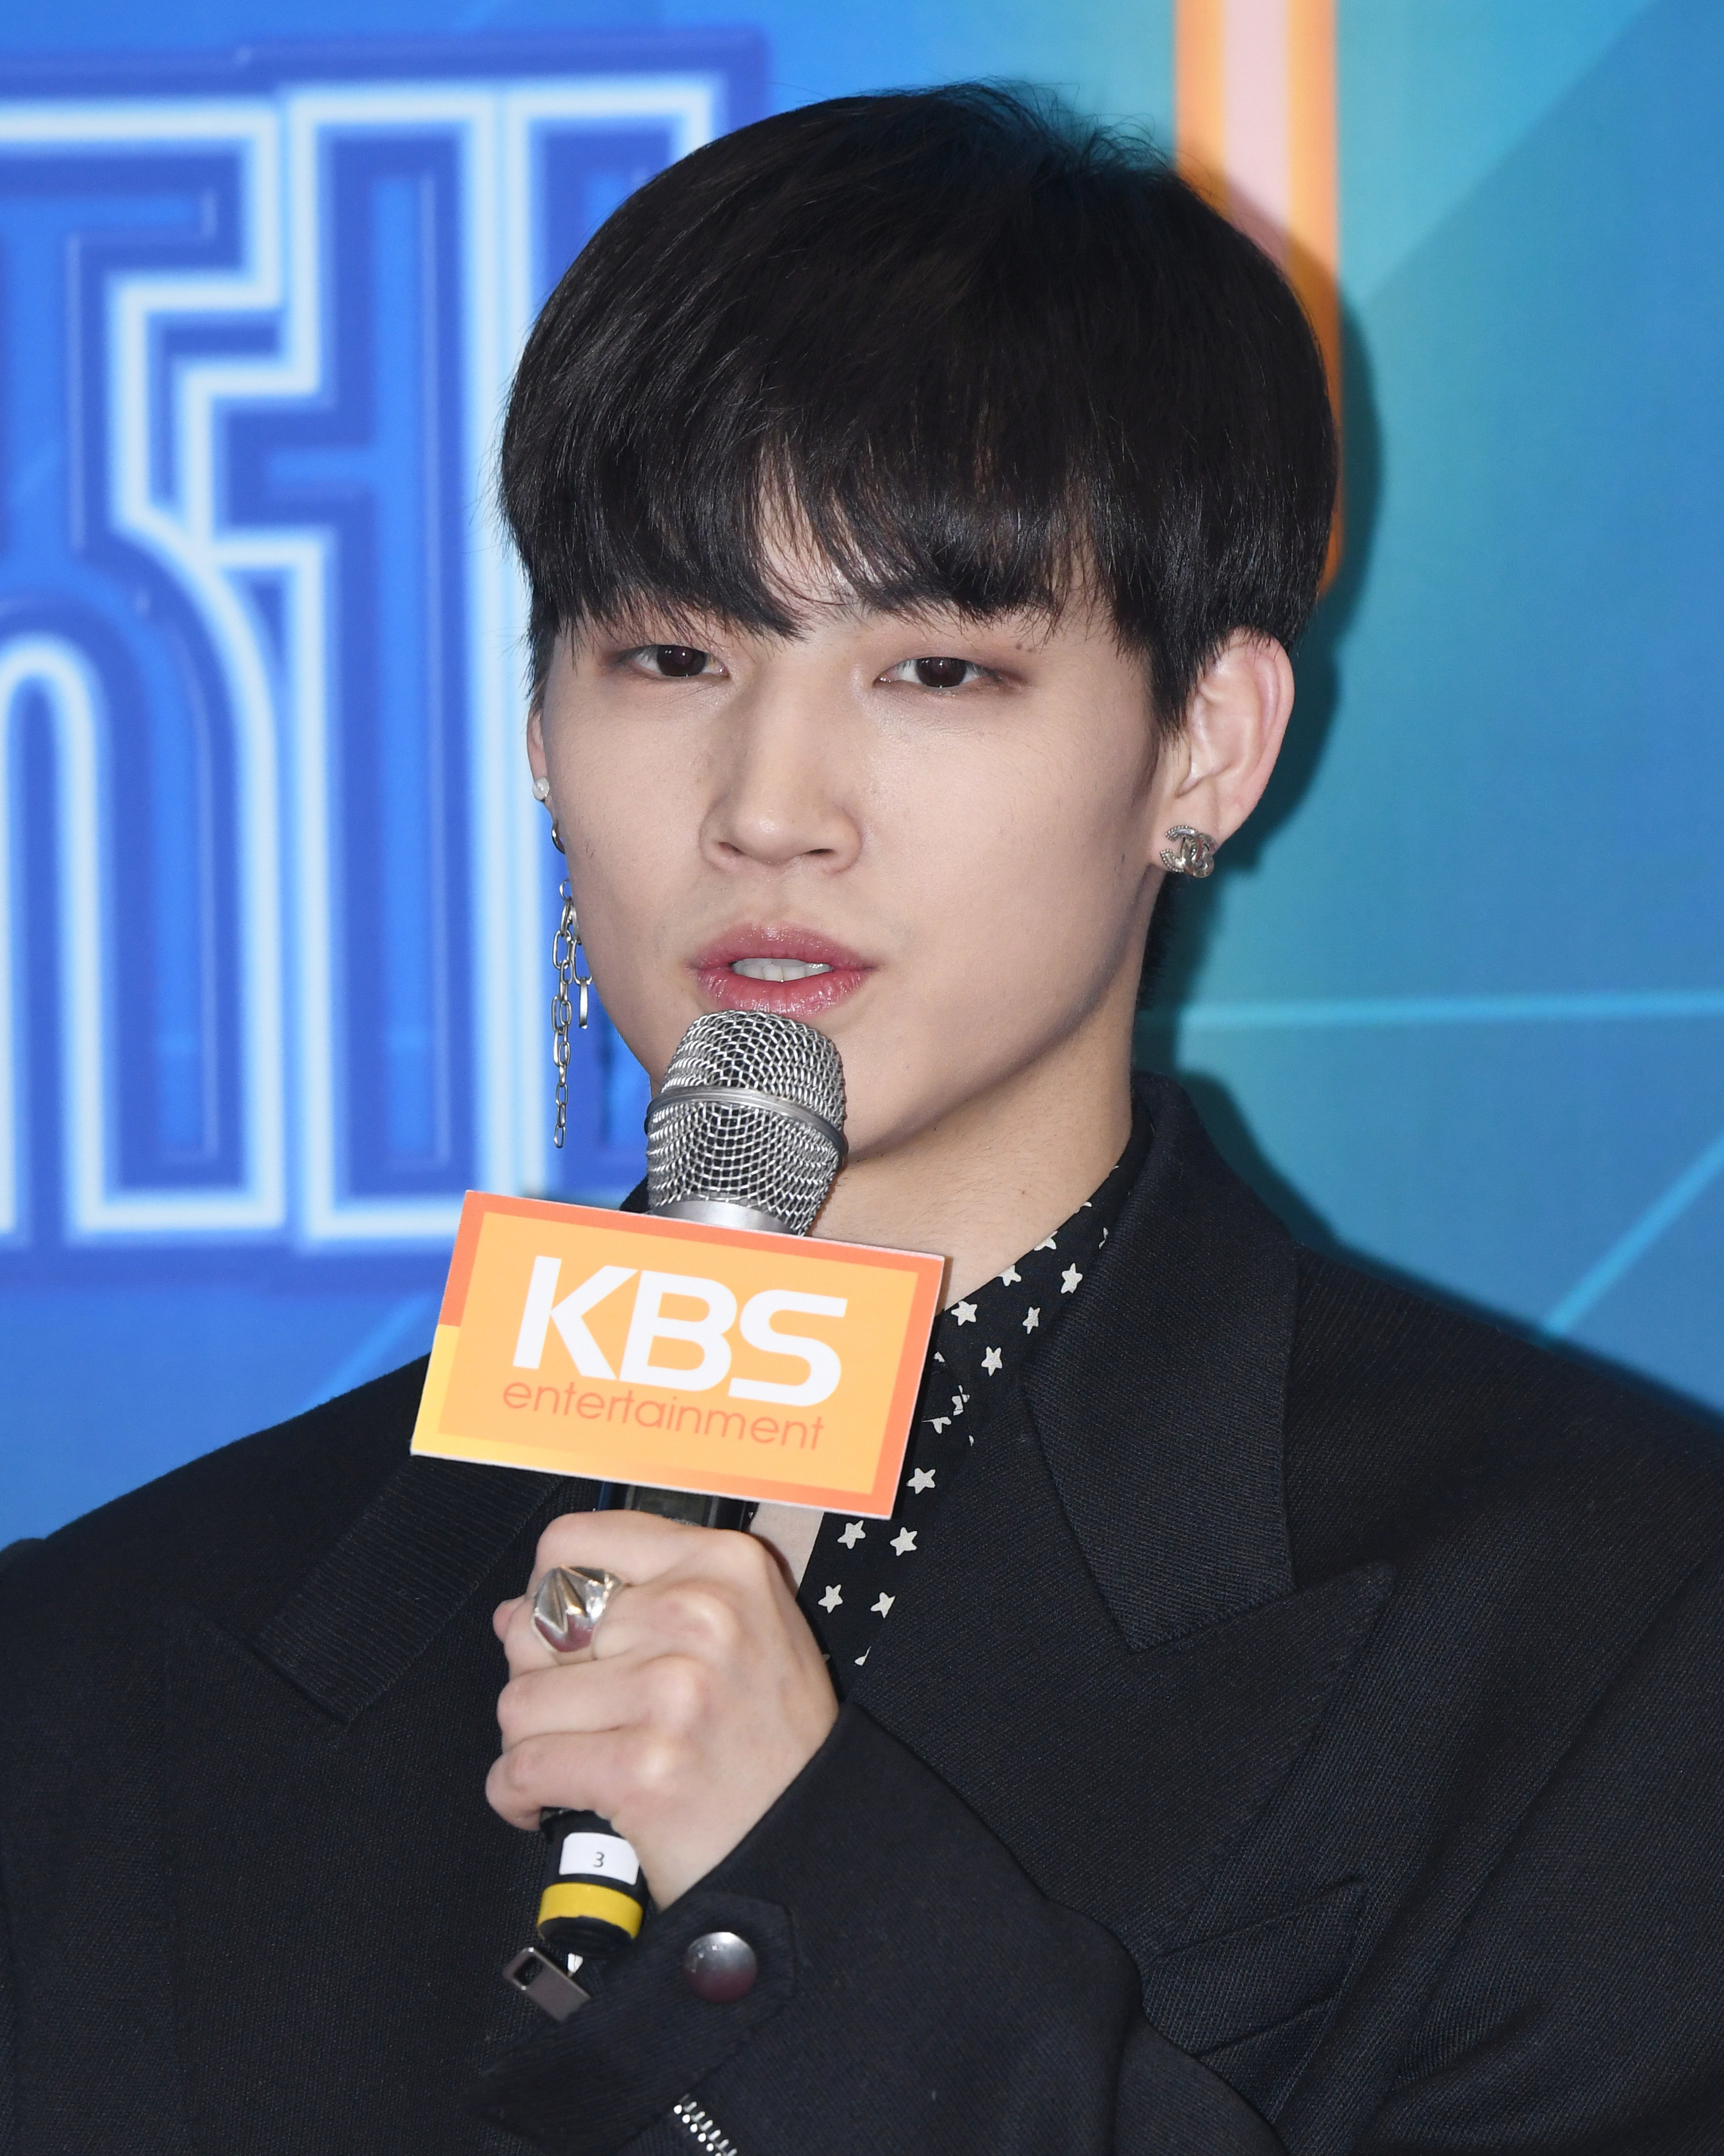 JB holds a microphone to his mouth with a sign on it saying &quot;KBS entertainment&quot;; he has floppy black hair that brushes his eyebrows and wears a long dangling silver earring in one ear